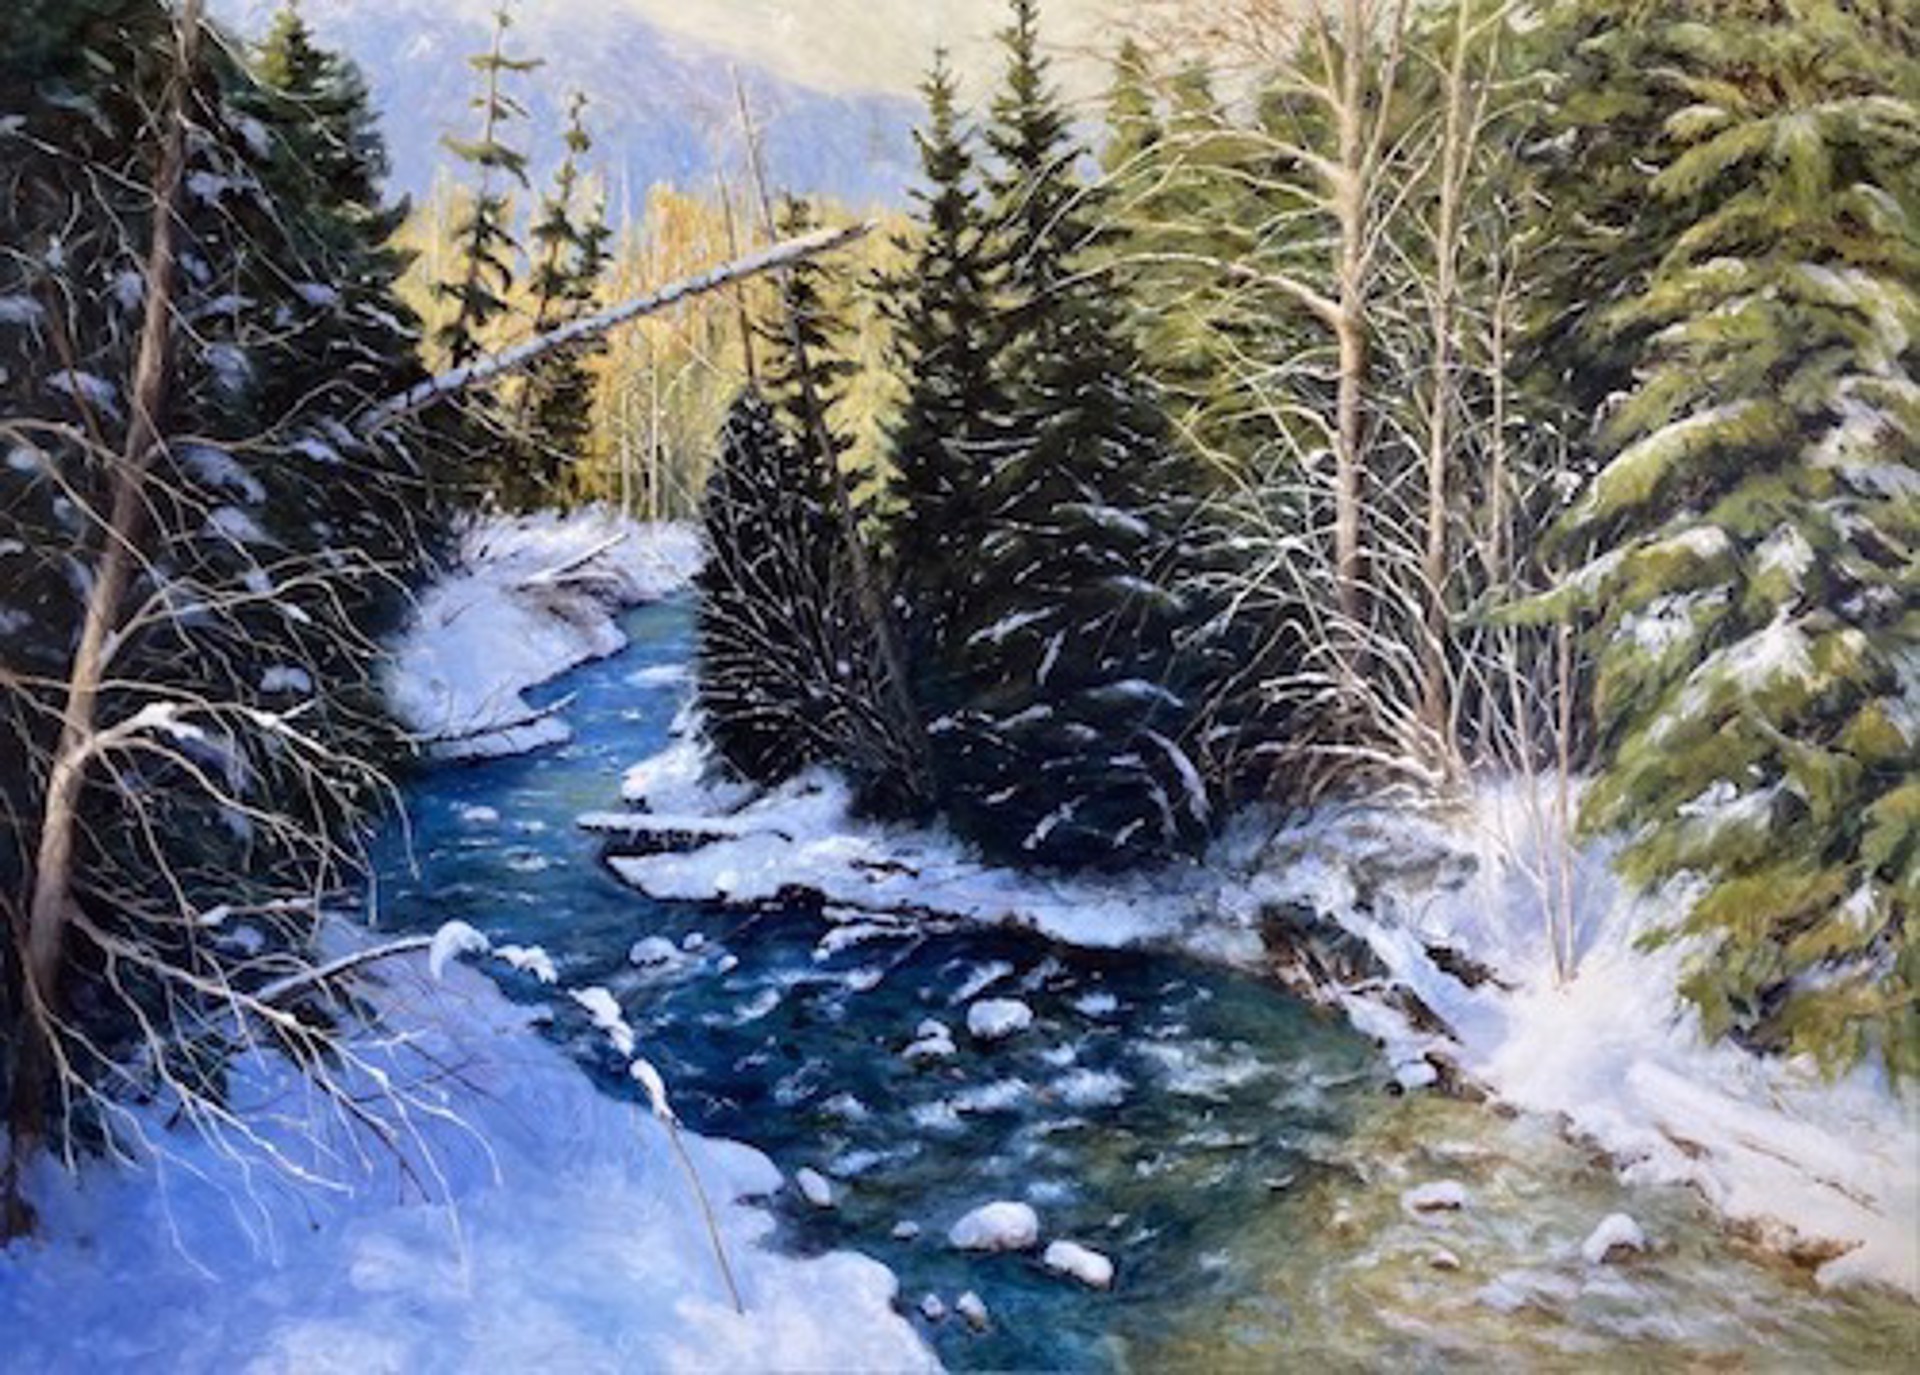 Spring Arrives in Whistler (fitz) by Doria Moodie